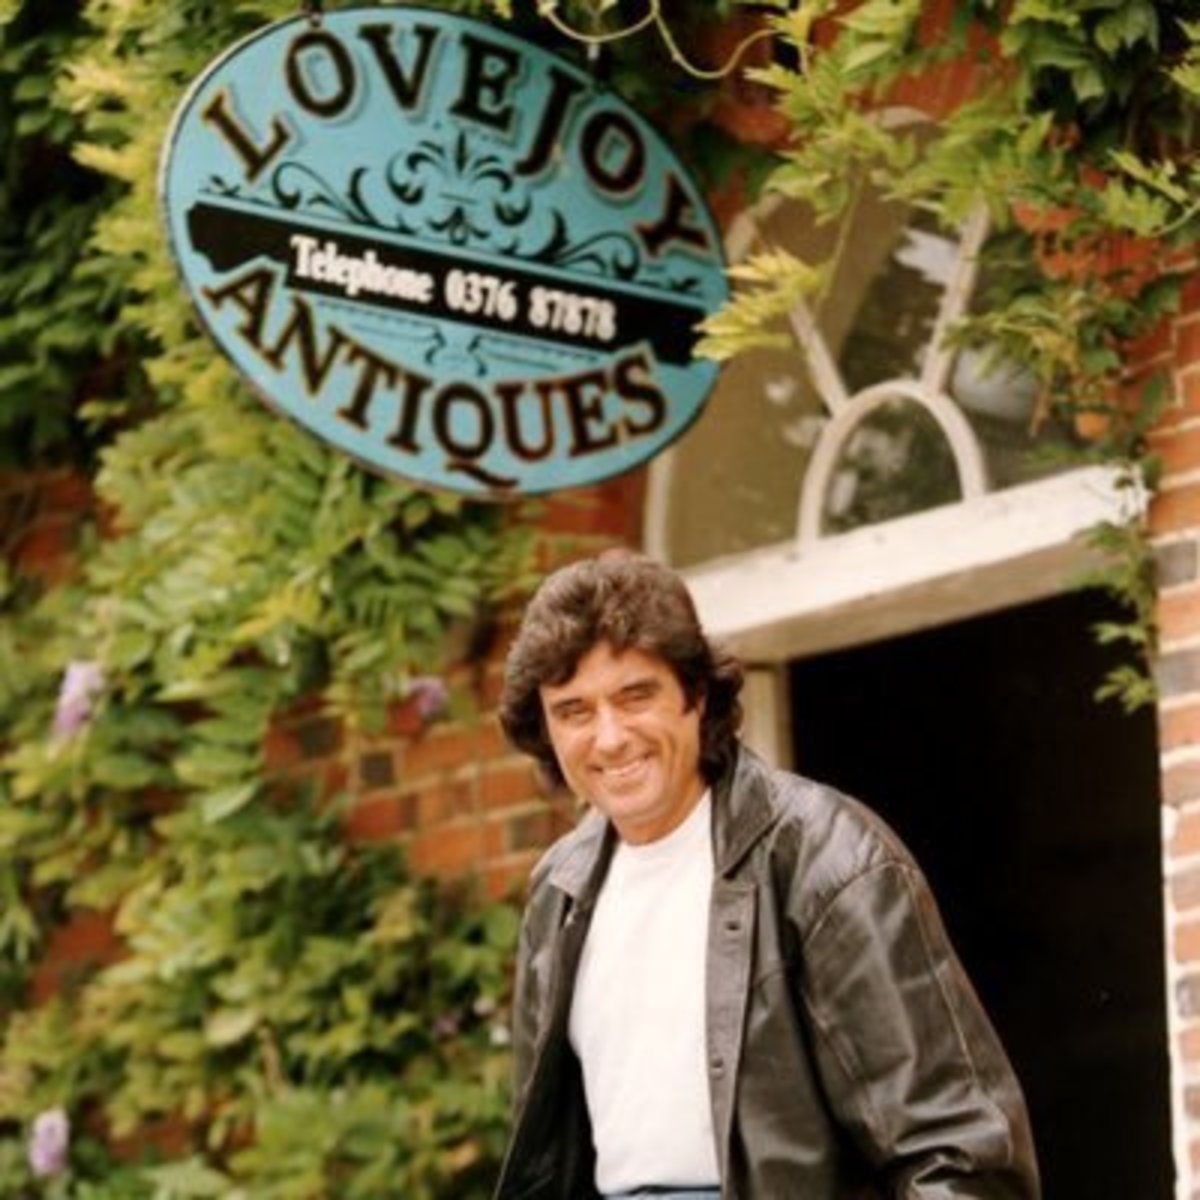 The likably roguish antiques dealer Lovejoy, played by Ian McShane.